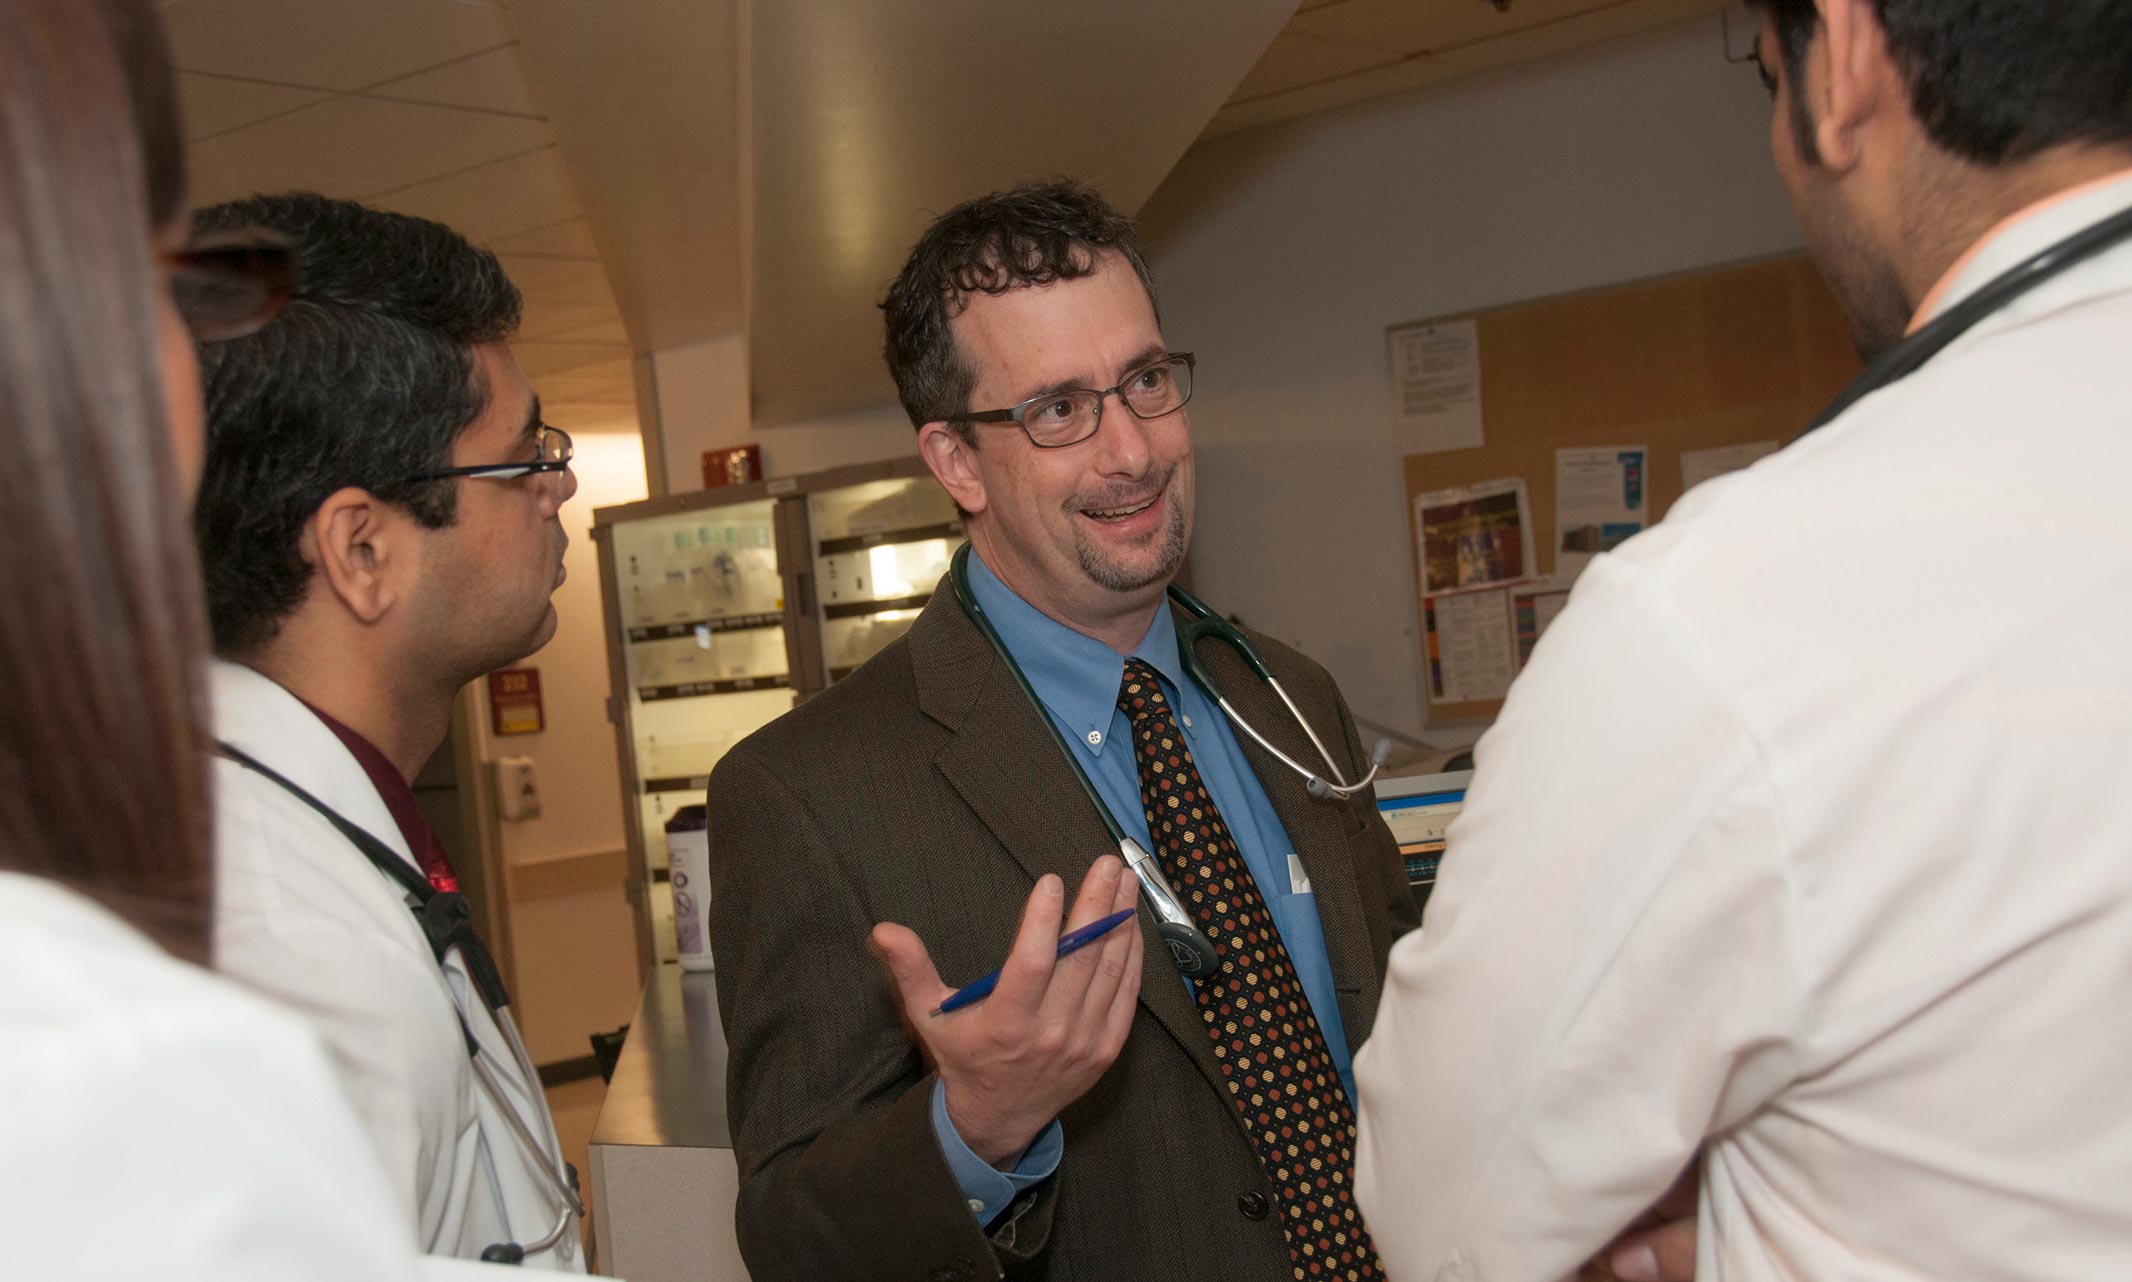 Dr. John Spertus in discussion with medical students